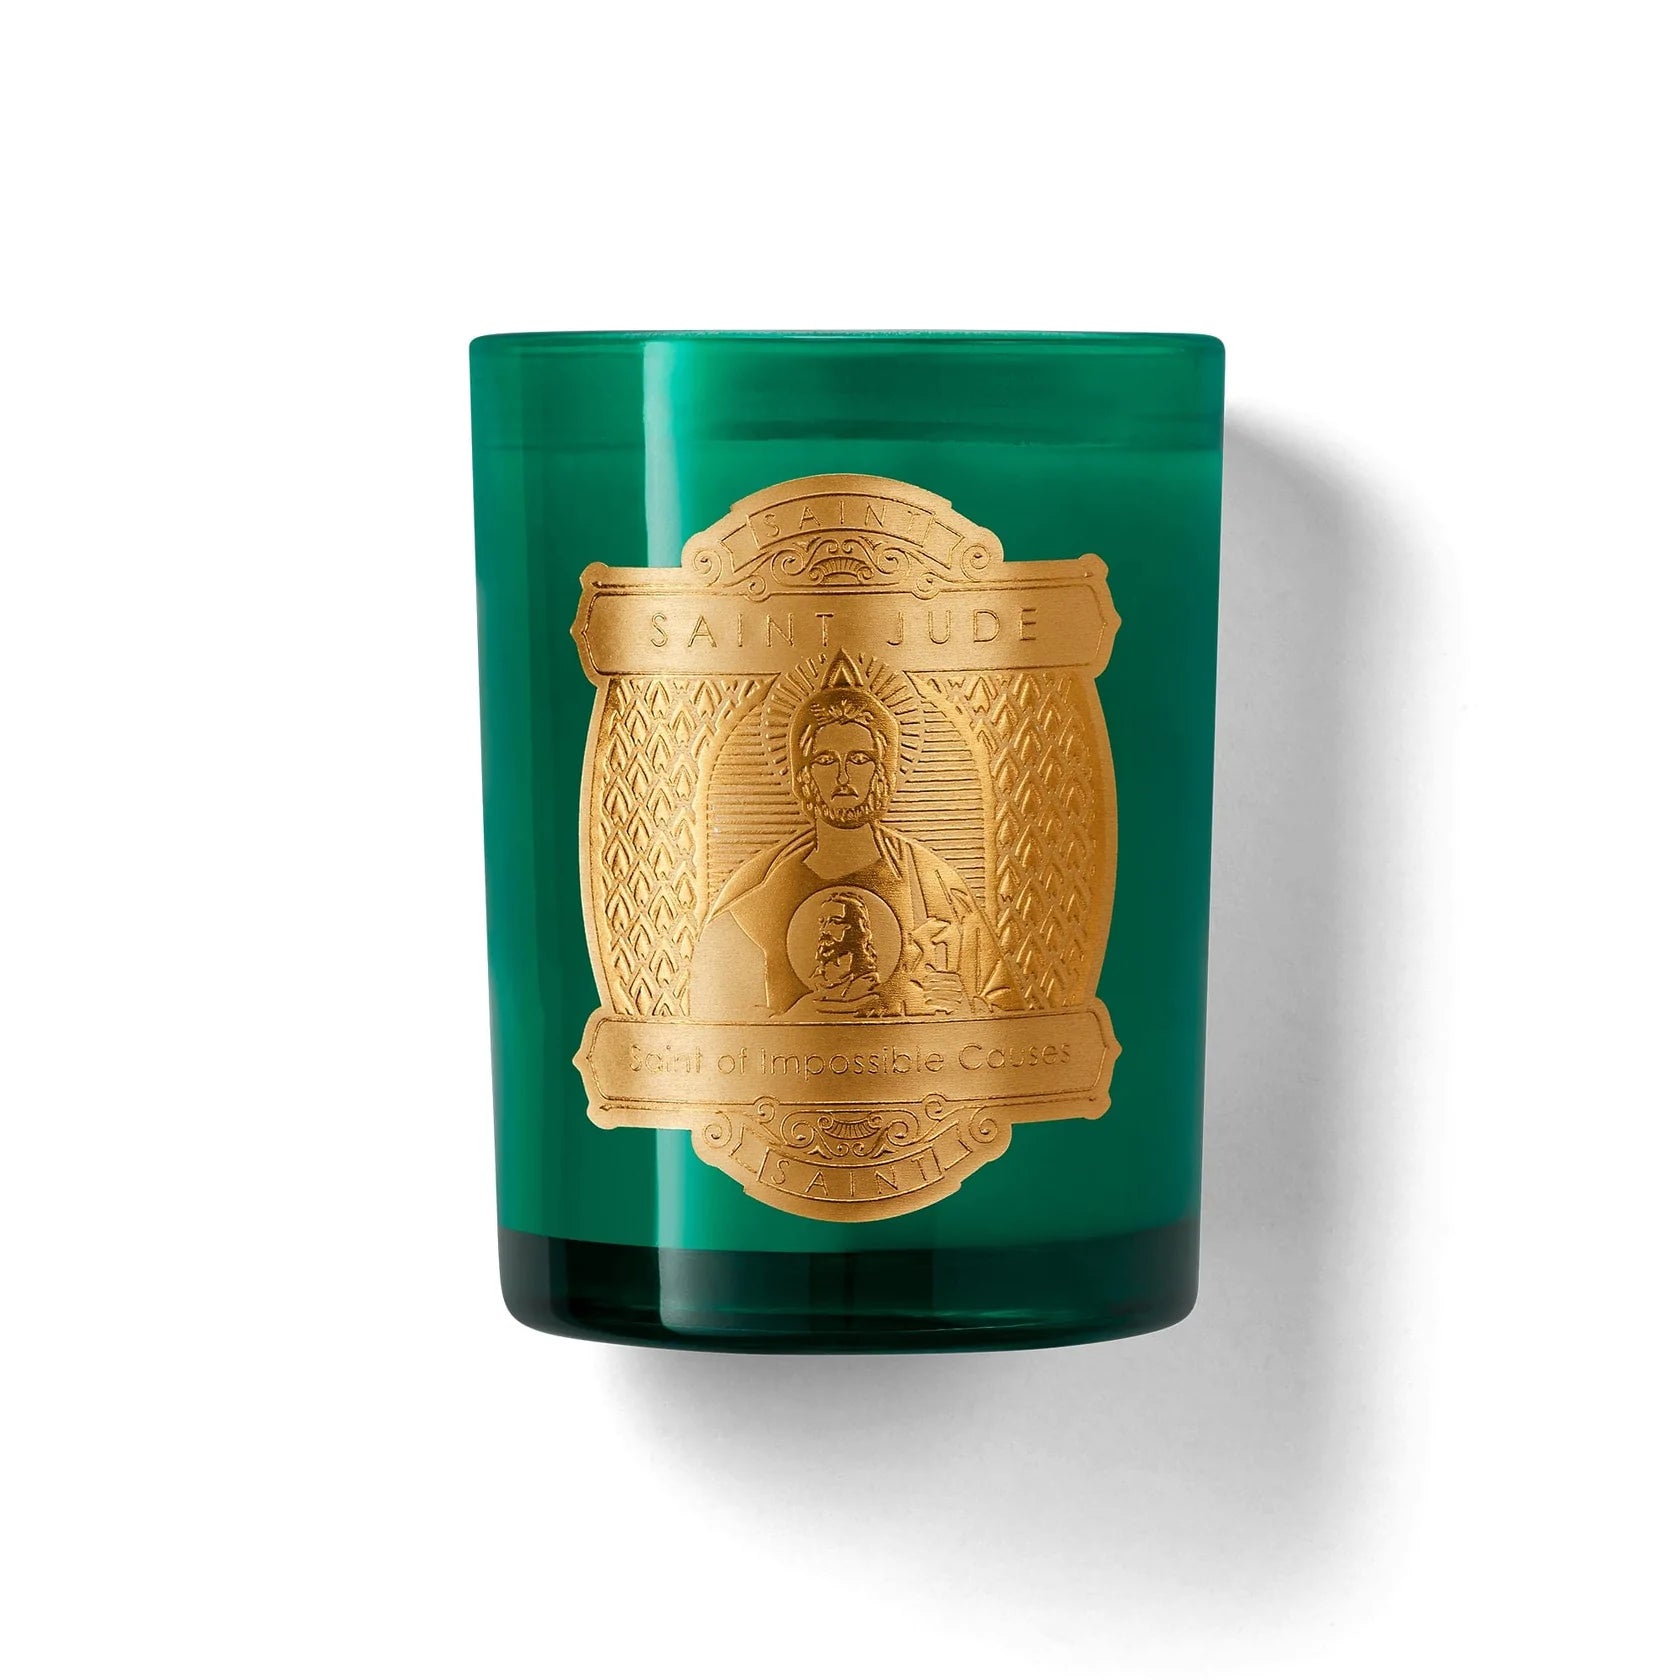 SPECIAL EDITION SAINT JUDE PRAYER CANDLE